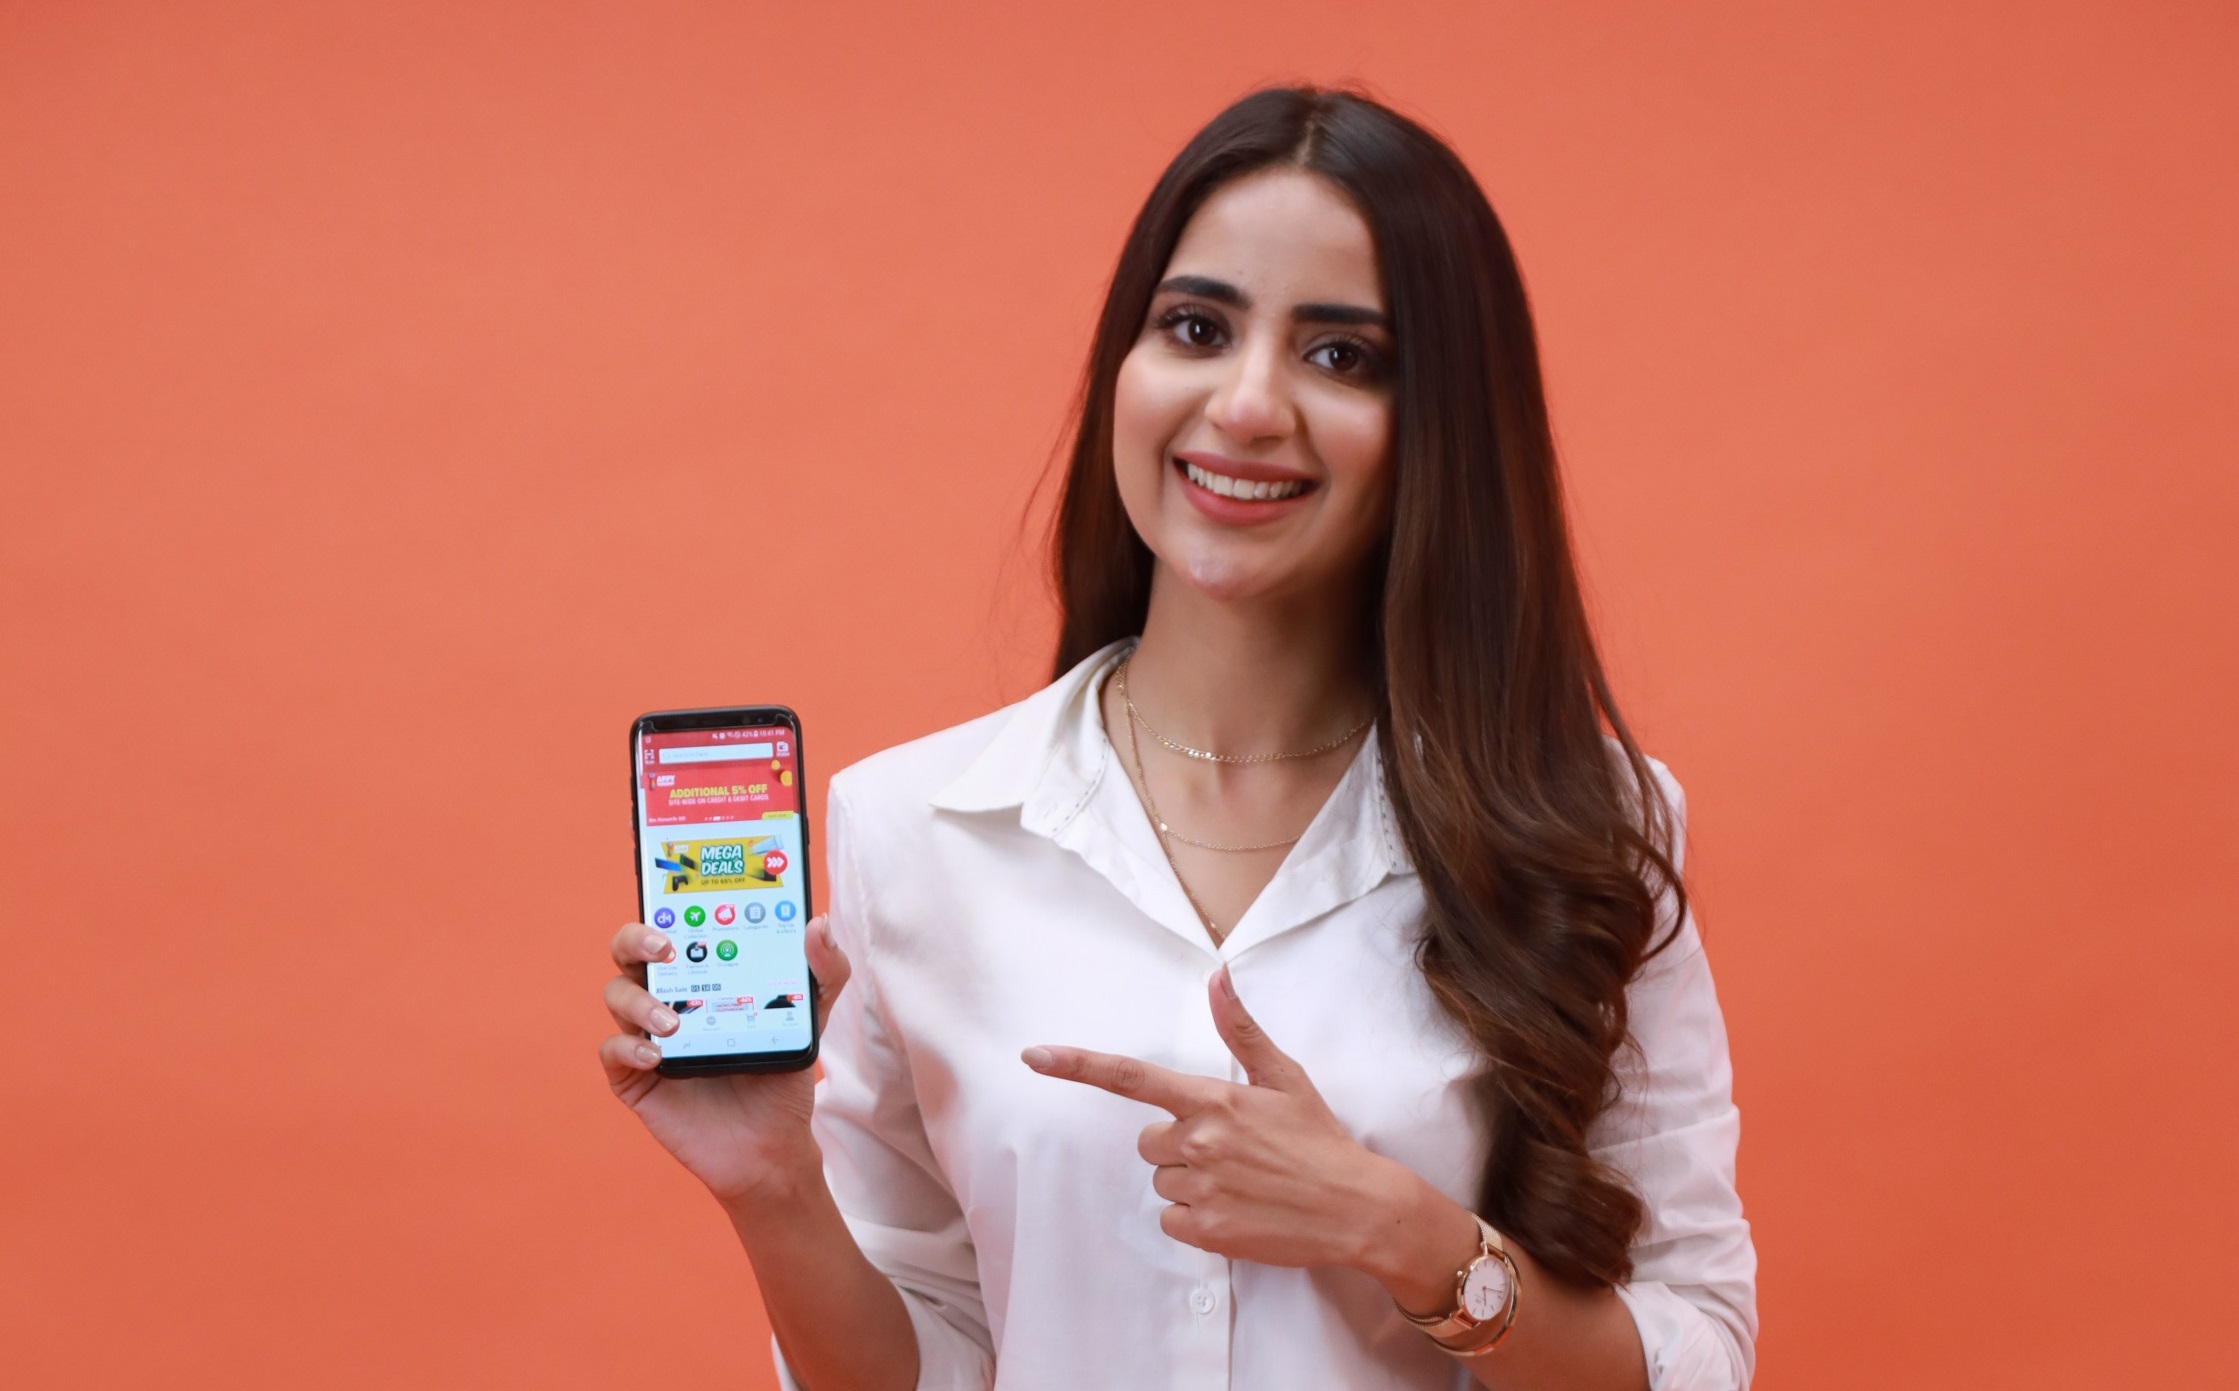 Daraz, the leading online marketplace in Pakistan, has launched two interac...